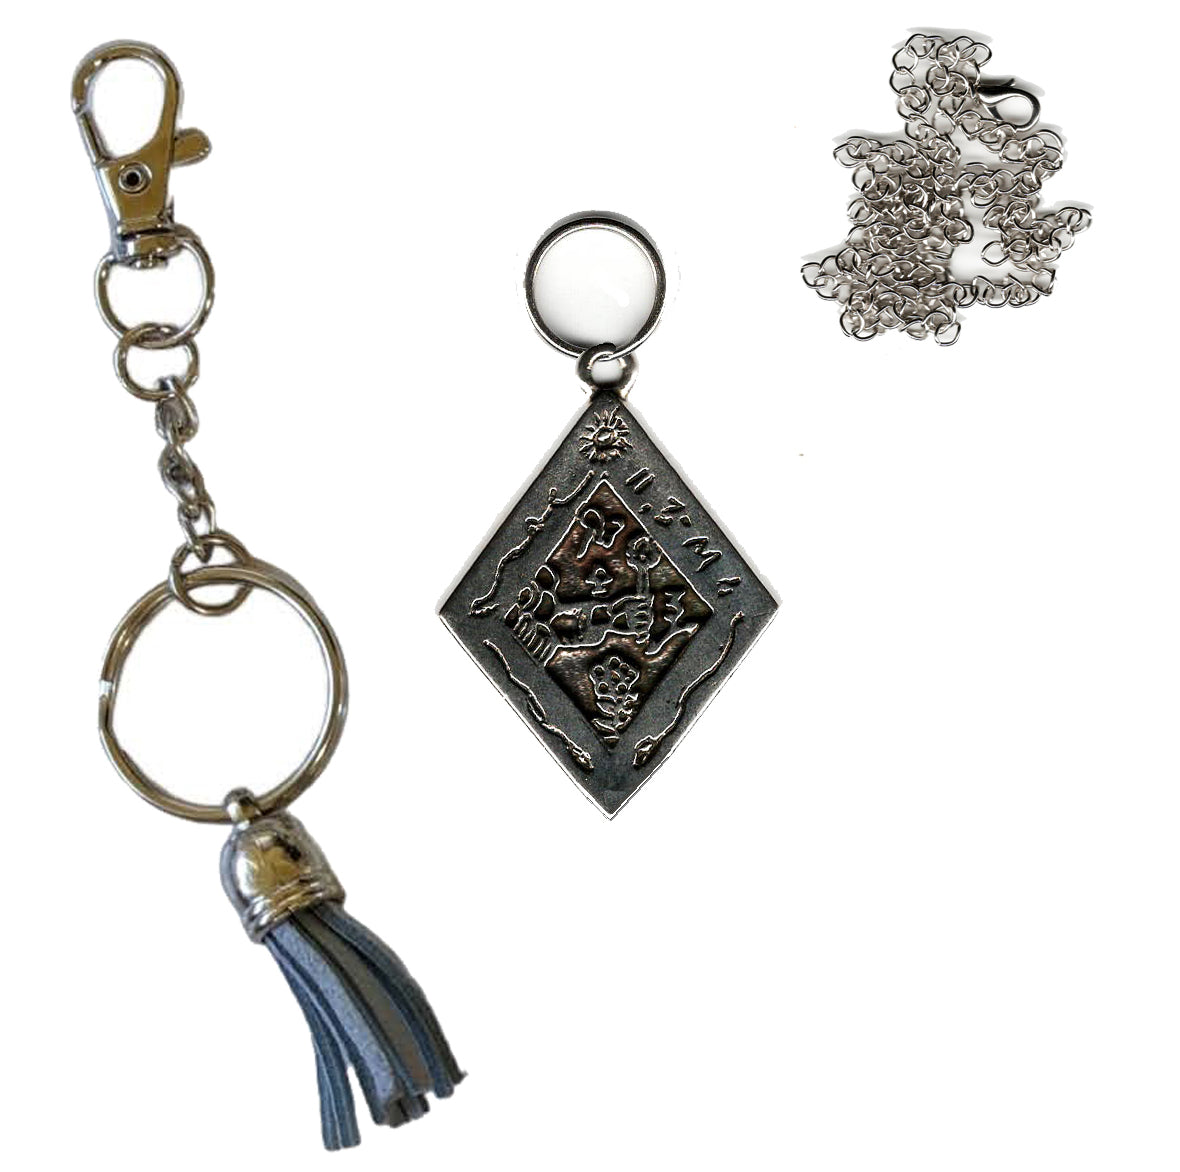 Discover Treasures Mystical Pendant and Keyring